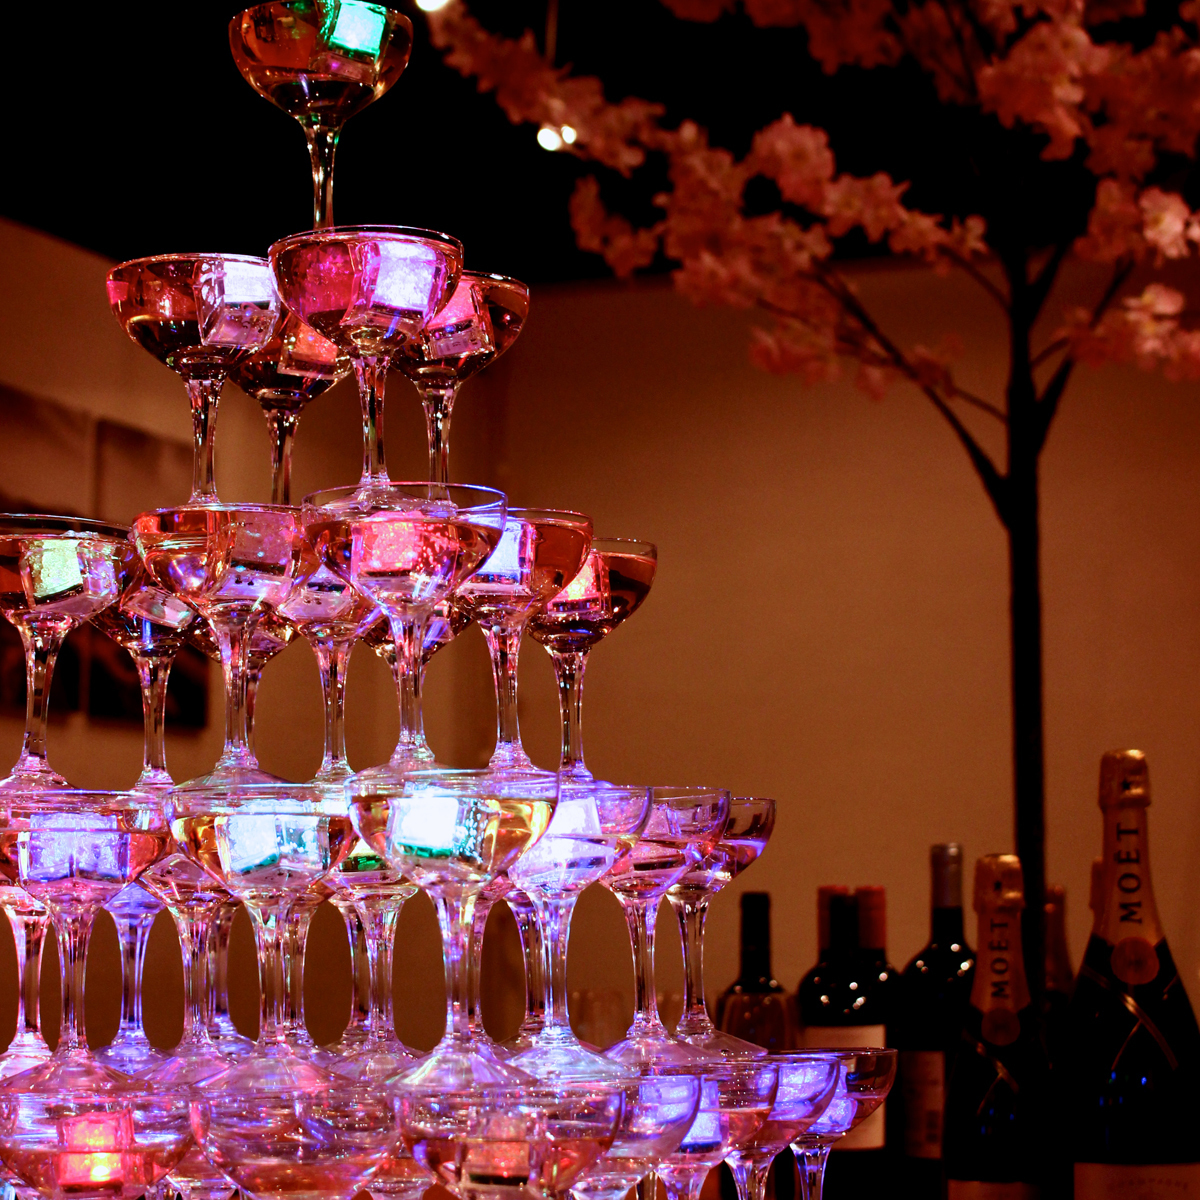 If you're going to have a reunion in Shibuya, we recommend Shibuya Picarie Main Store! A champagne tower at the reunion!